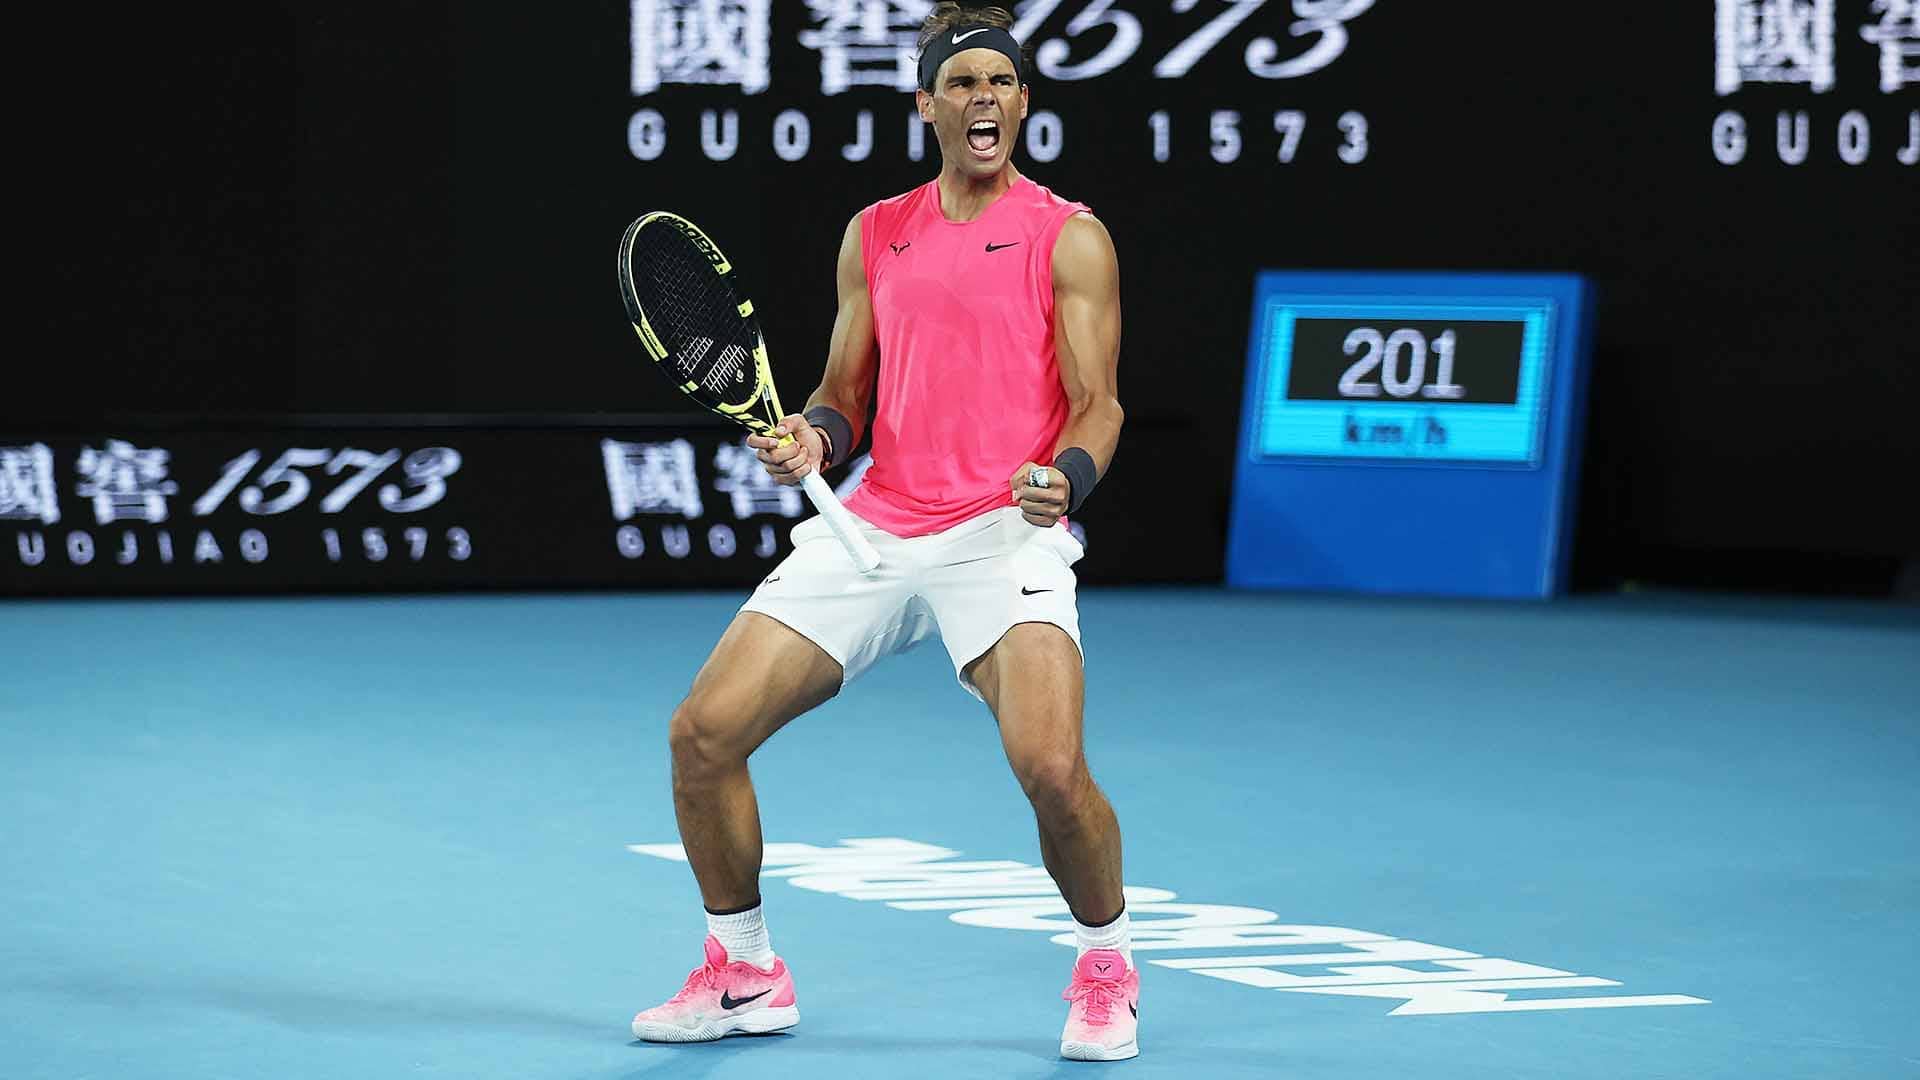 <a href='https://www.atptour.com/en/players/rafael-nadal/n409/overview'>Rafael Nadal</a> is the top seed at the <a href='https://www.atptour.com/en/tournaments/australian-open/580/overview'>Australian Open</a>.